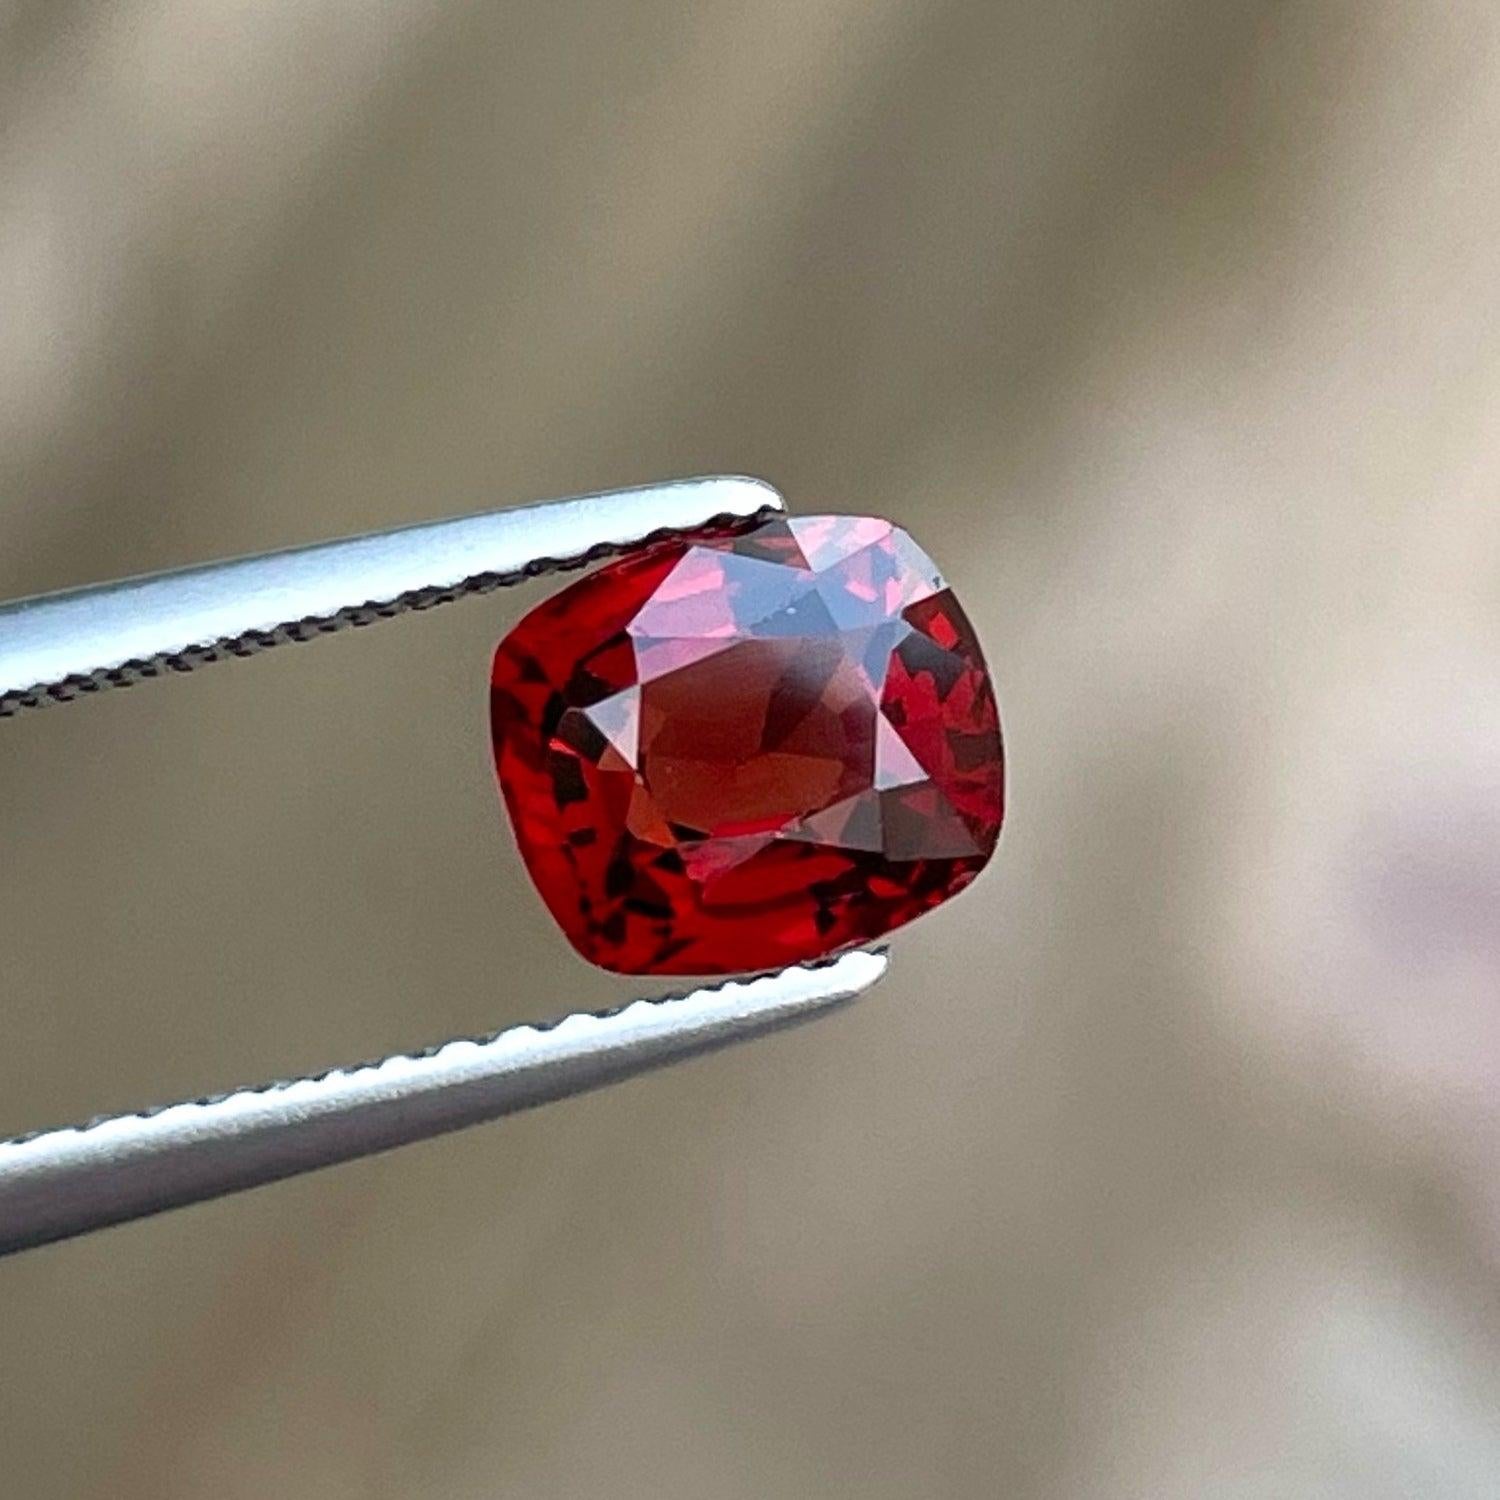 Gorgeous Orange Red Spinel Gemstone, Available For Sale At Wholesale Price Natural High Quality 1.37 carats SI Clarity Natural Loose Spinel from Burma.

Product Information:
GEMSTONE TYPE:	Gorgeous Orange Red Spinel Gemstone
WEIGHT:	1.37